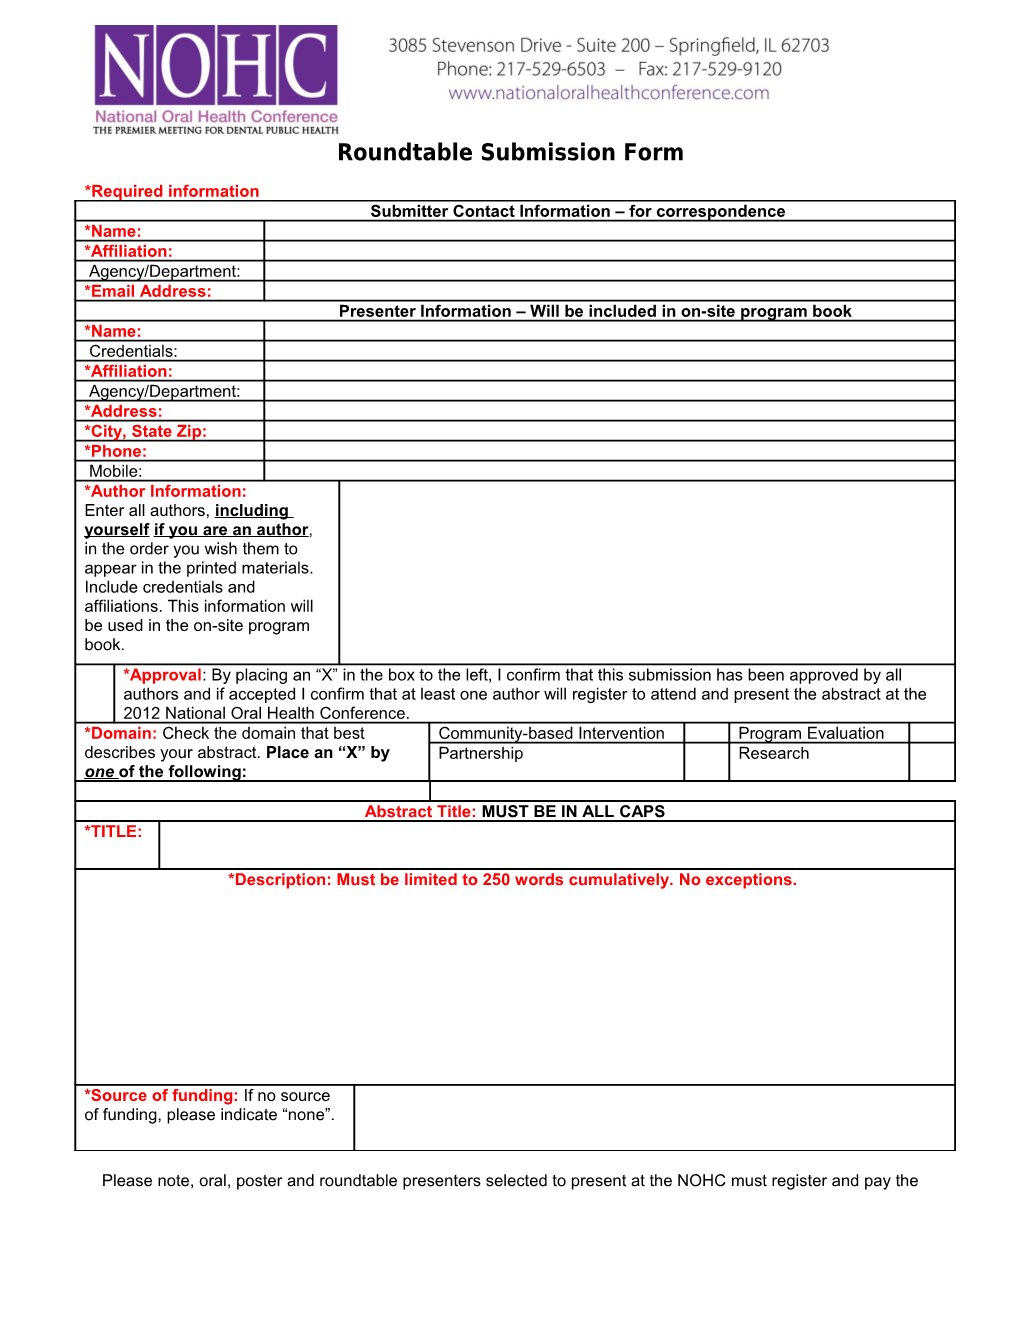 Roundtable Submission Form